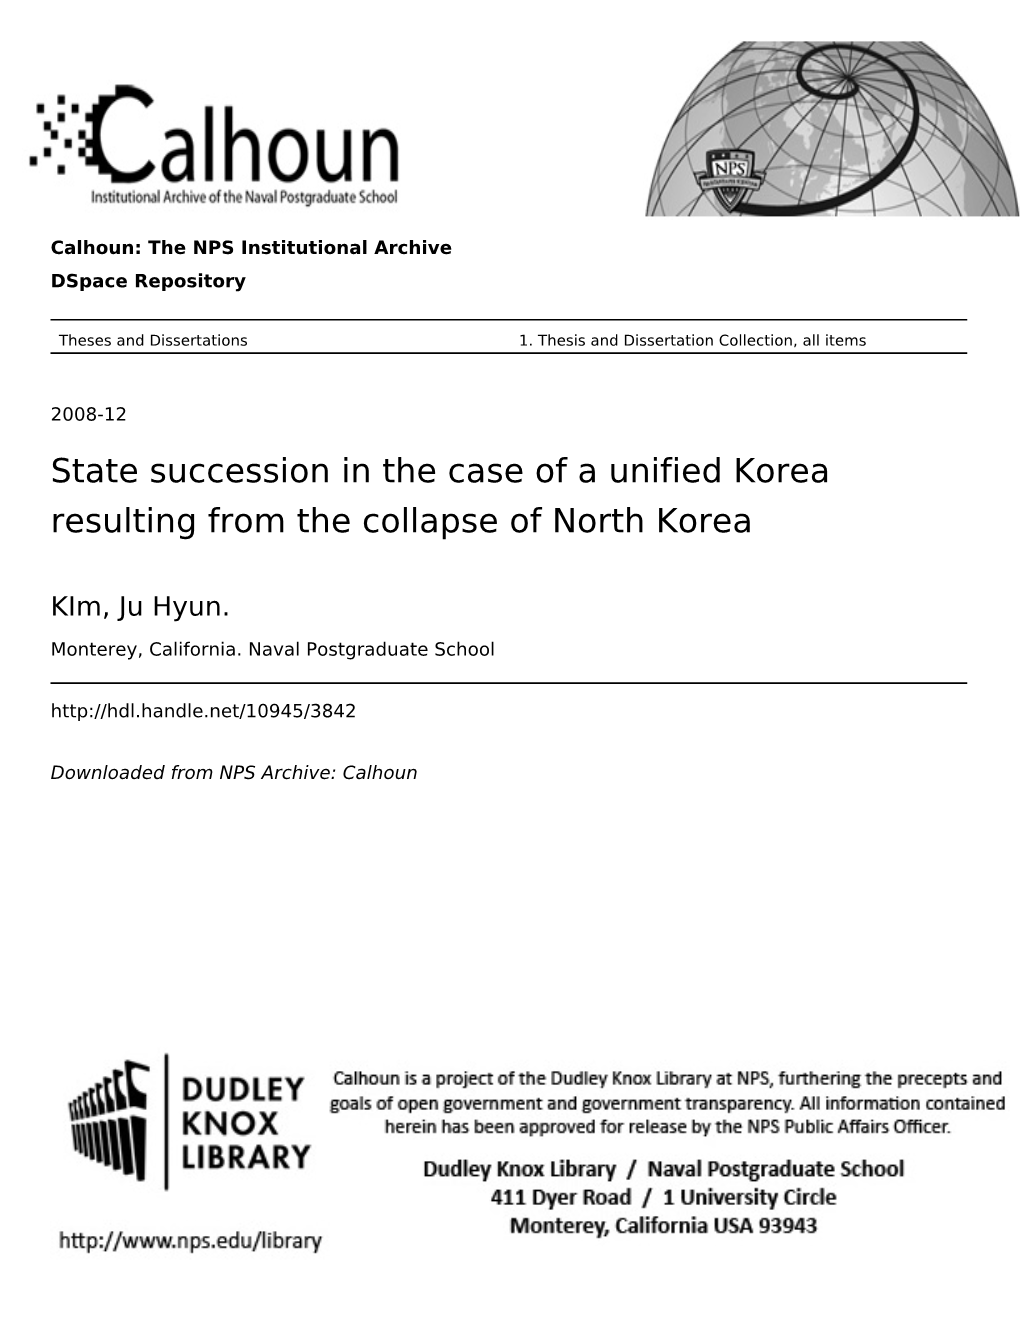 State Succession in the Case of a Unified Korea Resulting from the Collapse of North Korea